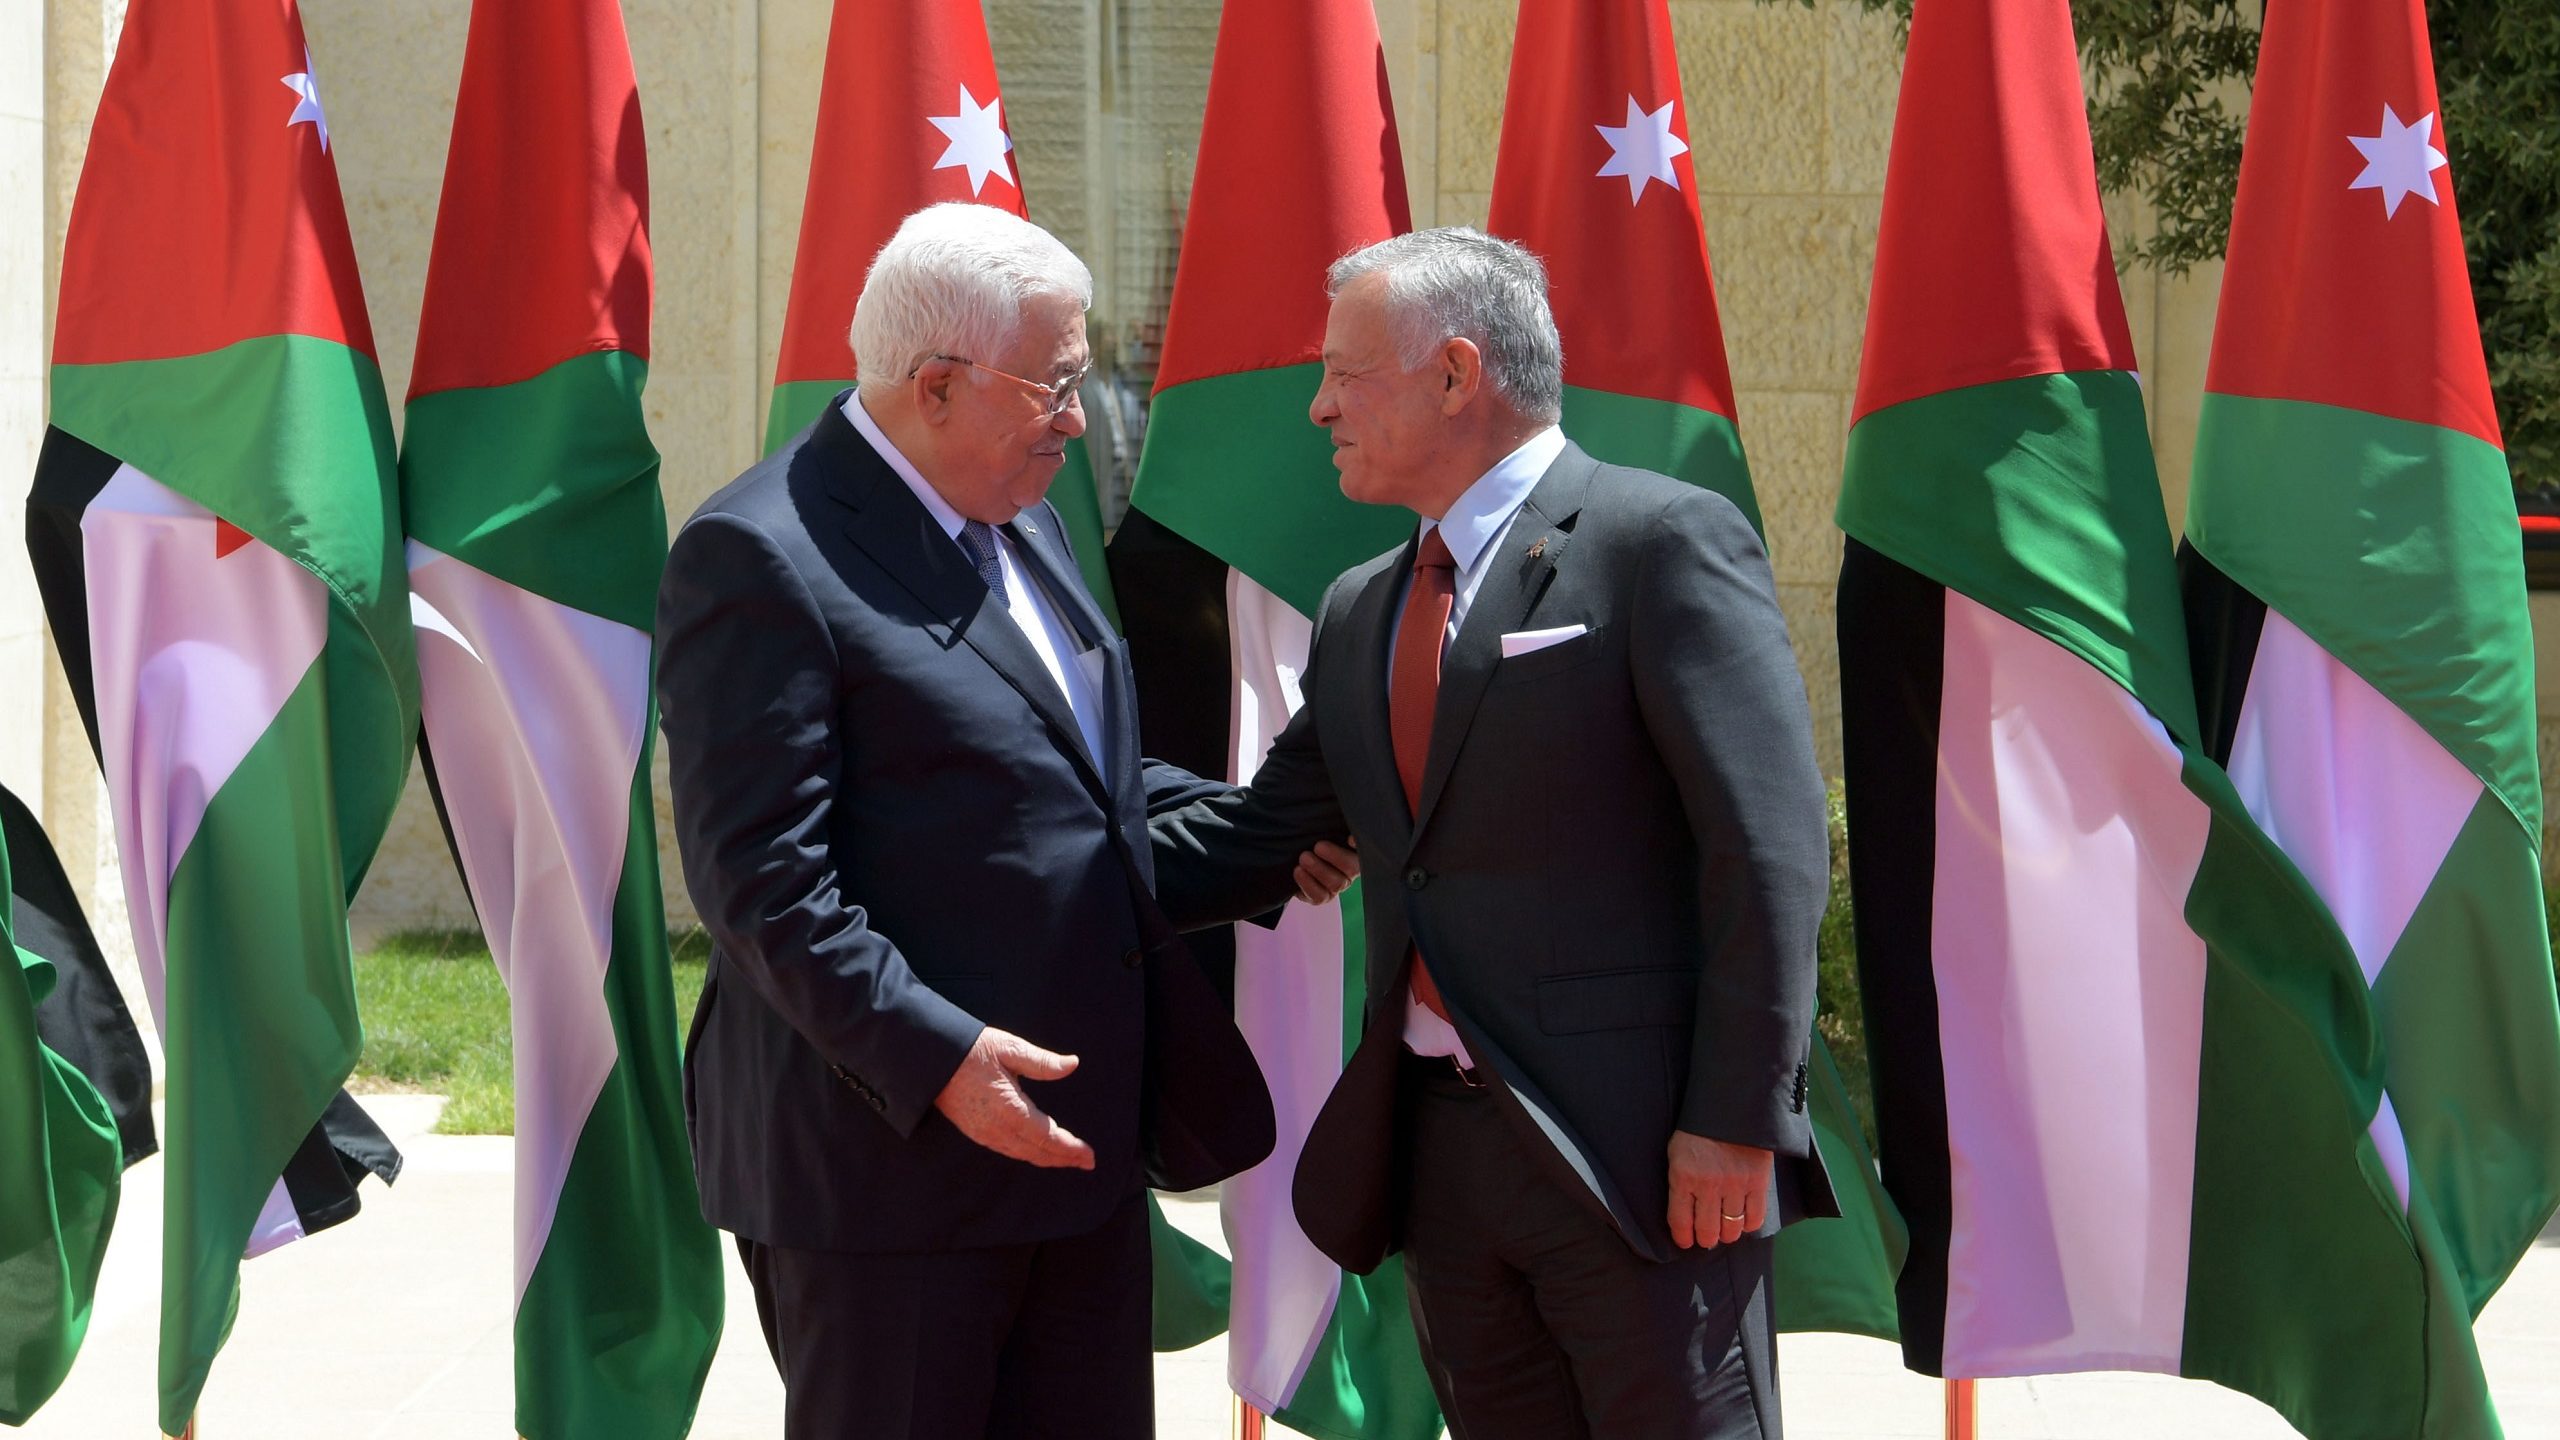 Jordan’s King Meets With Palestinian President in Attempt To Revive Talks With Israel